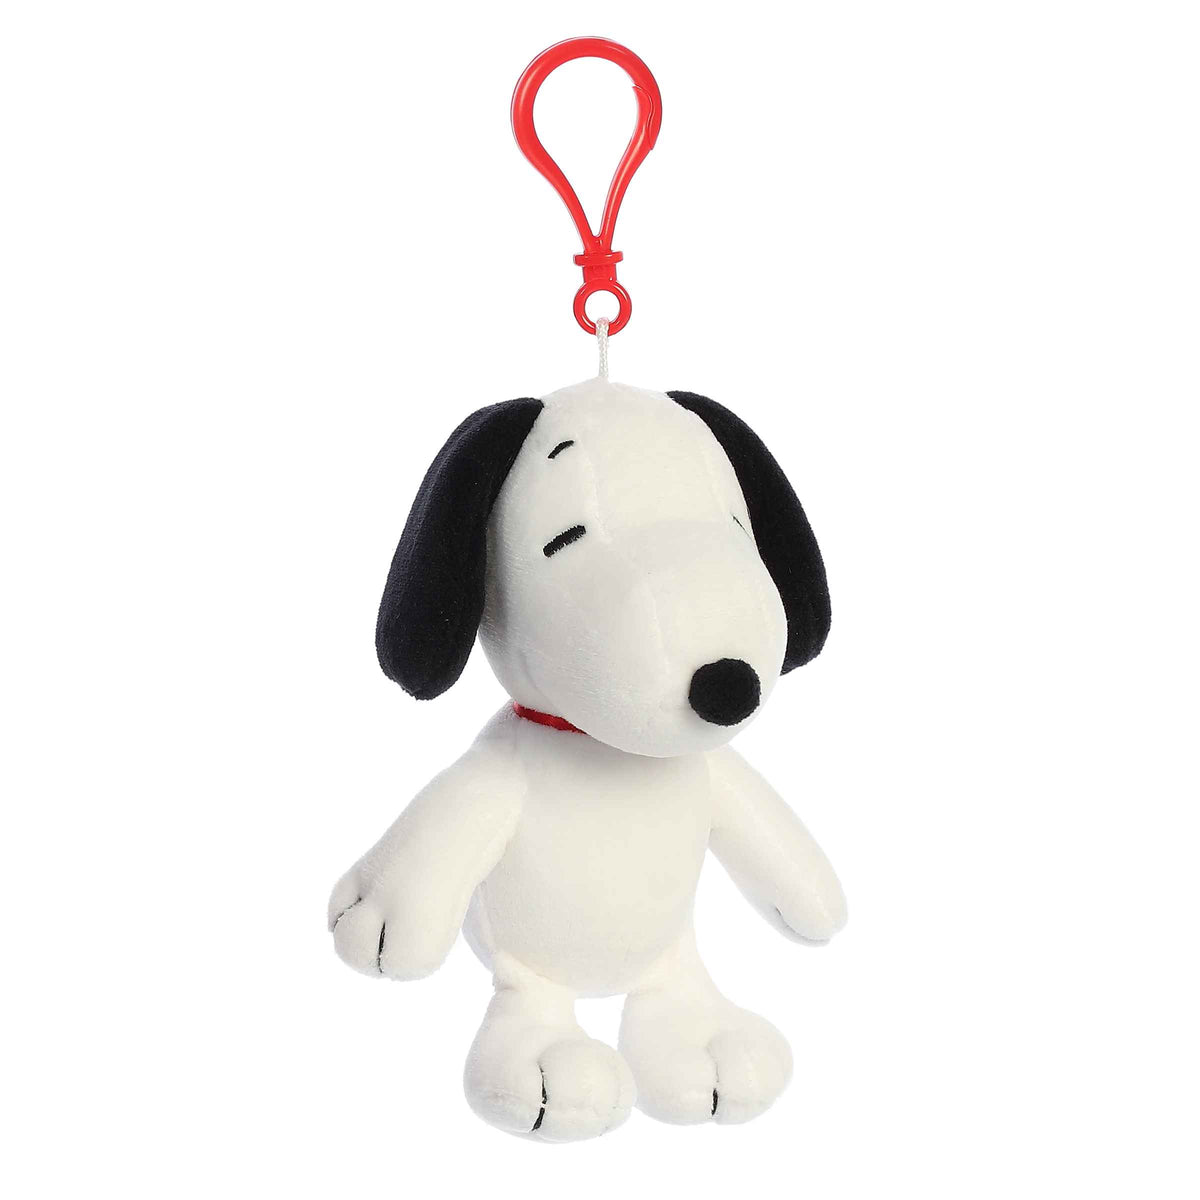 Snoopy Plush Keychain from Peanuts plush collection by Aurora, with red collar and smile, durable and soft